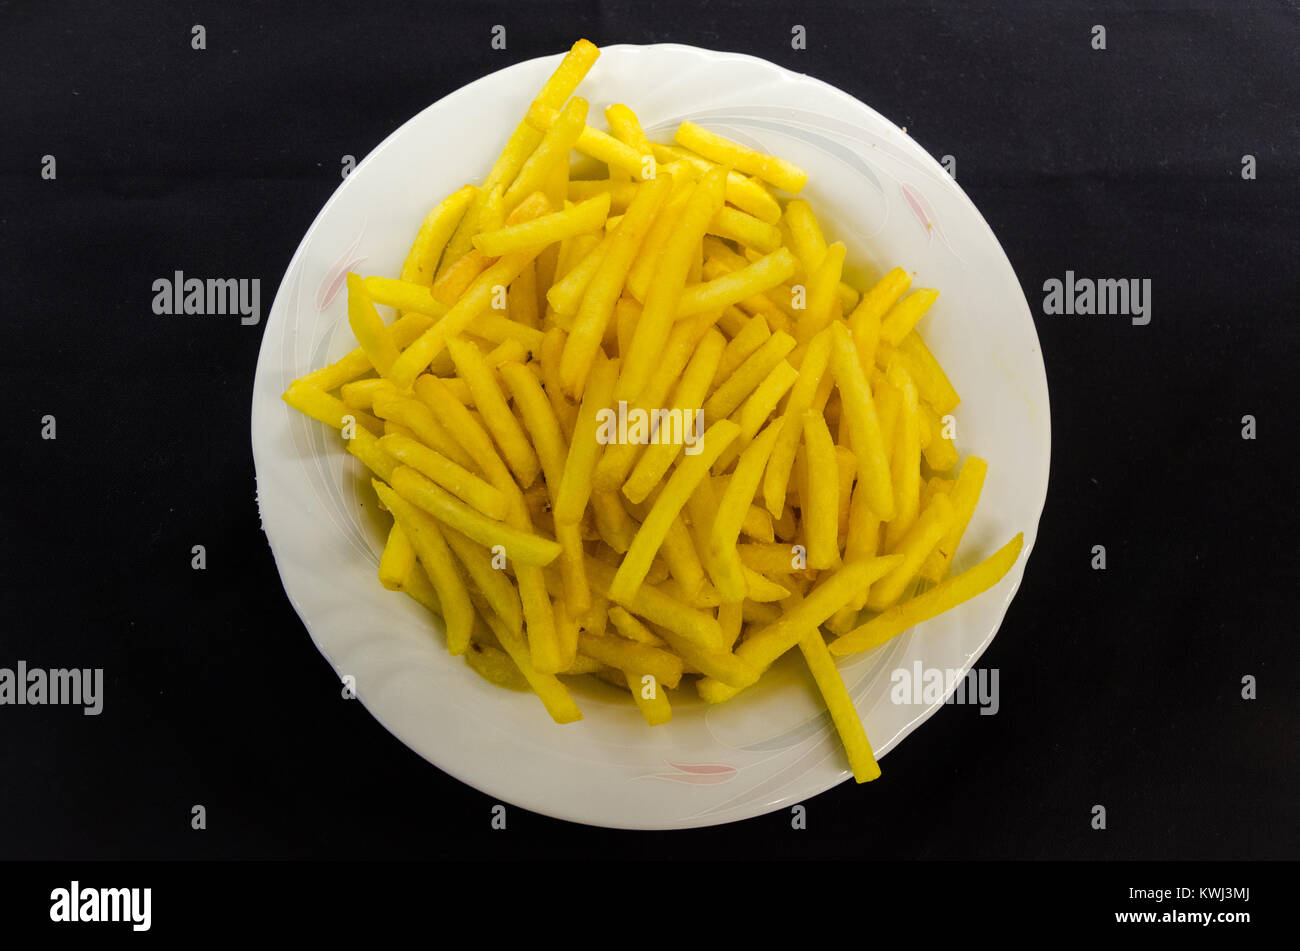 French Fries on a White Plate over Black Background. Stock Photo